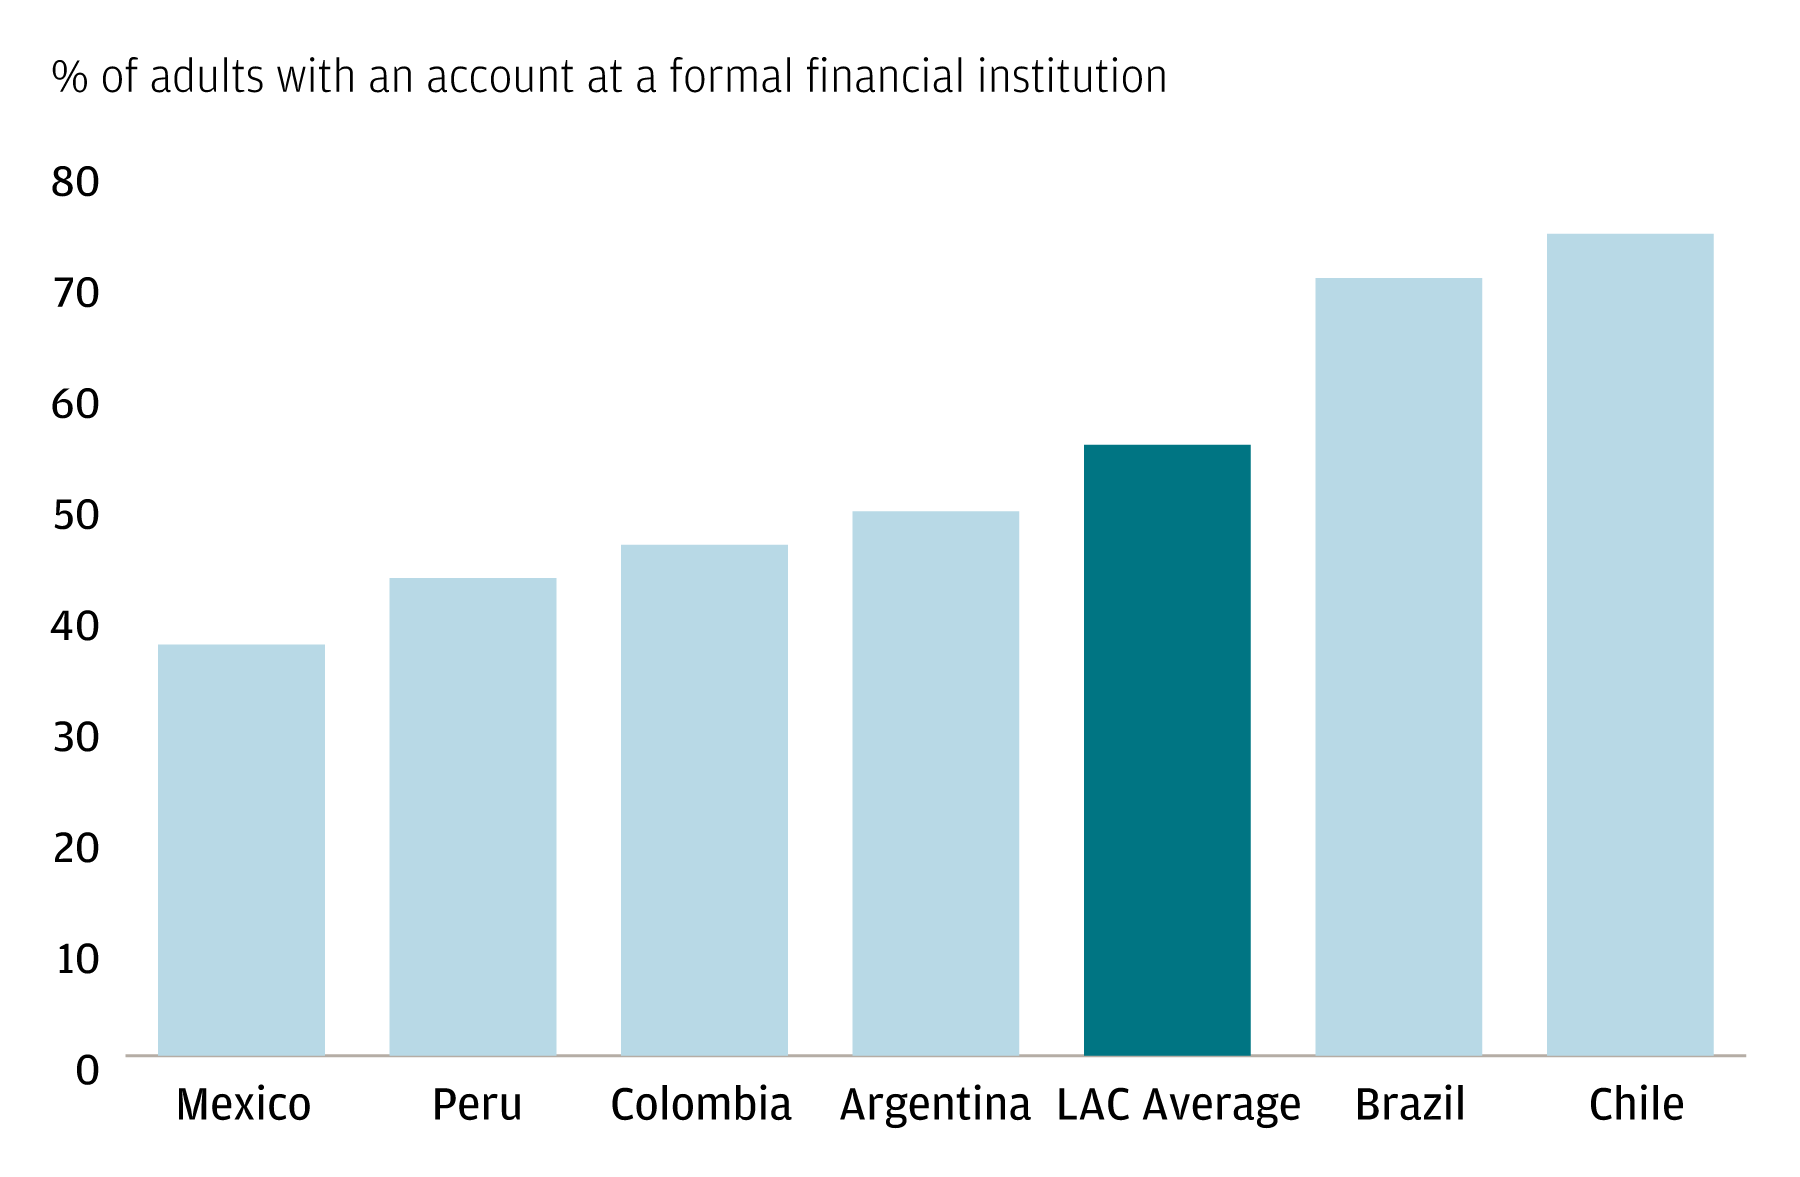 A bar chart showing account penetration through the percentage of adults with an account at a formal financial institution, for select Latin America and Caribbean countries versus the regional average.